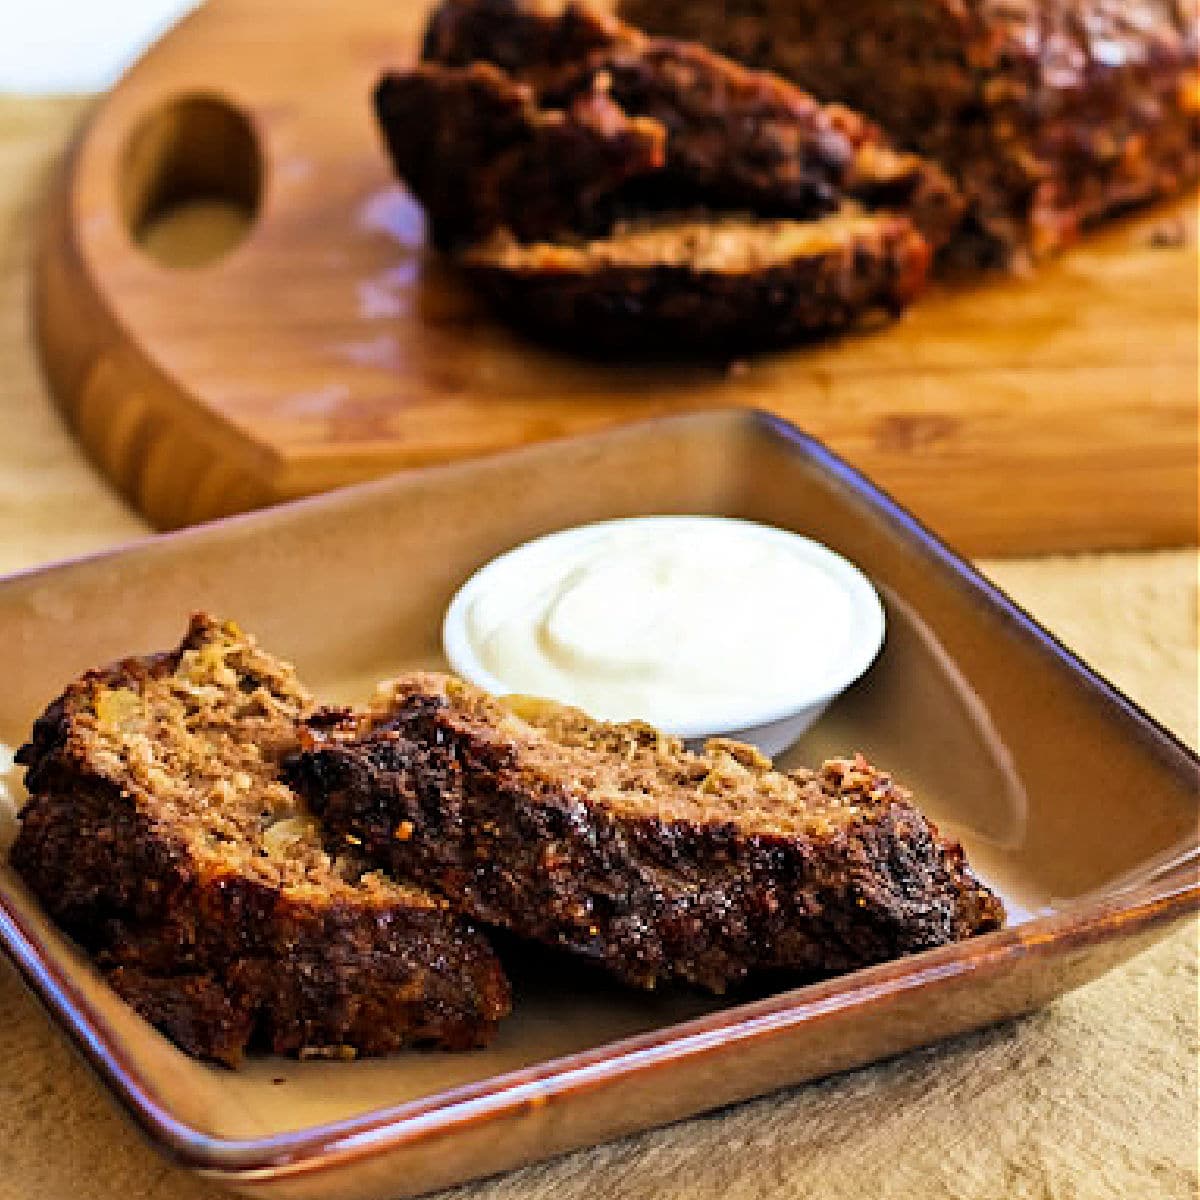 Horseradish Meatloaf (with Sour Cream-Horseradish Sauce) shown on serving plate.